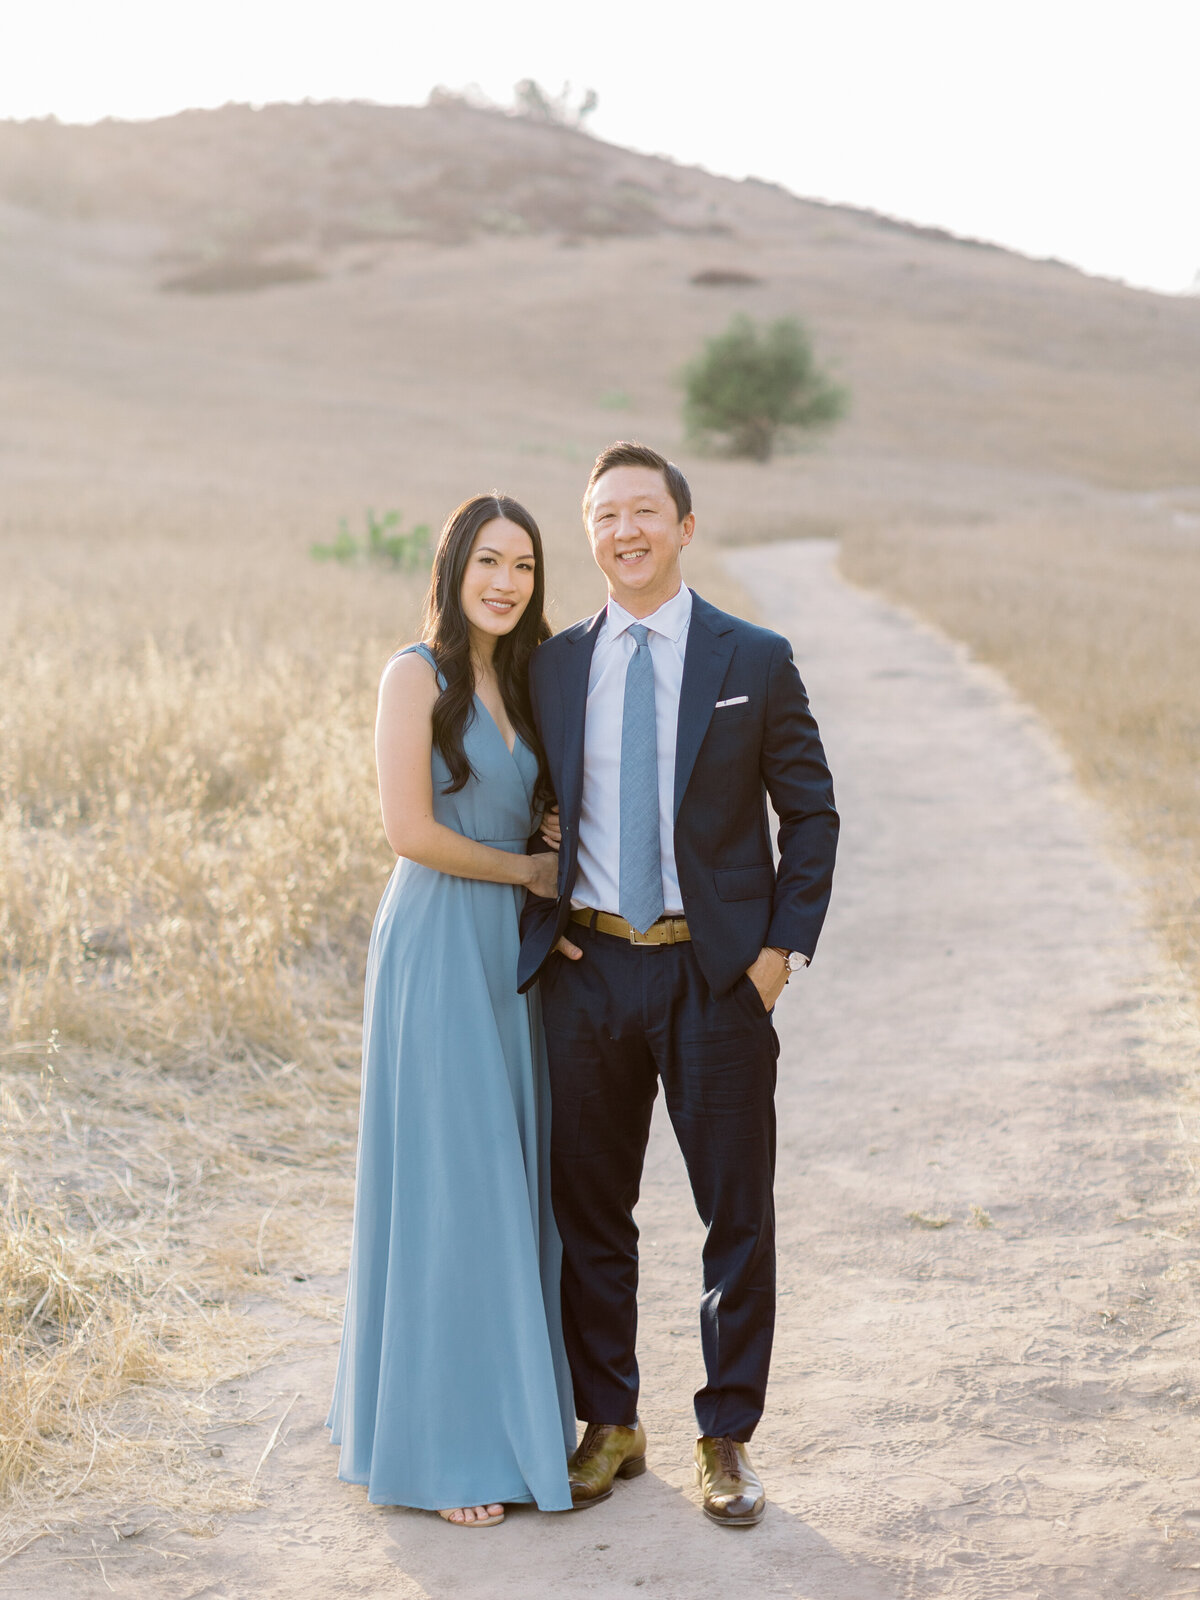 riley-wilderness-engagement-jade-maria-photography-21